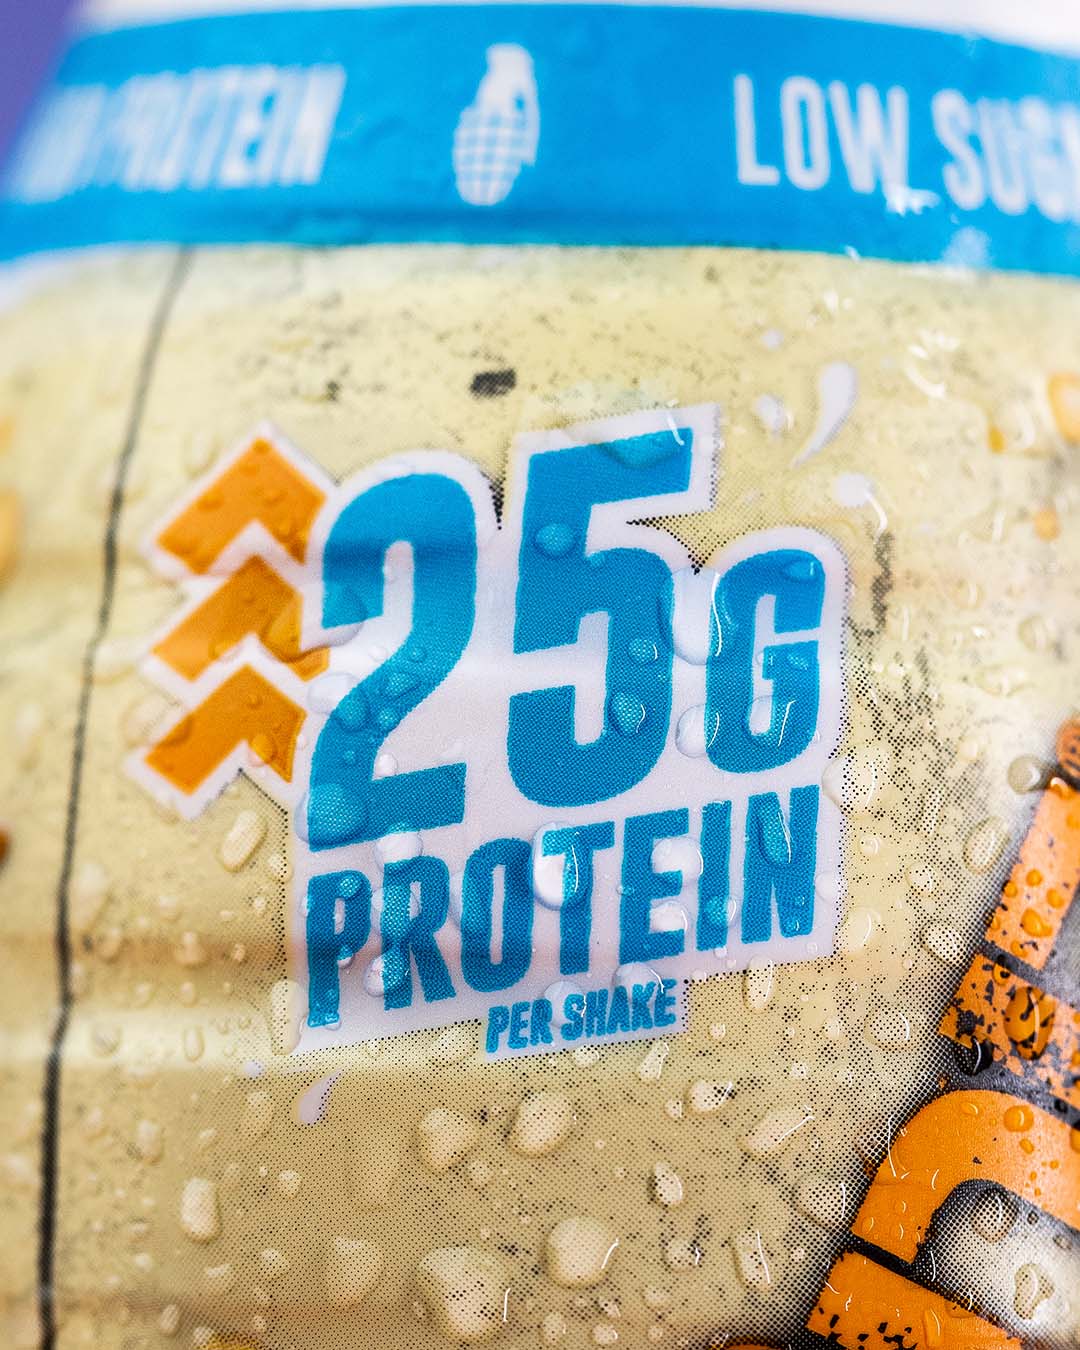 Label text "25g protein per shake" for White Chocolate Protein Shake